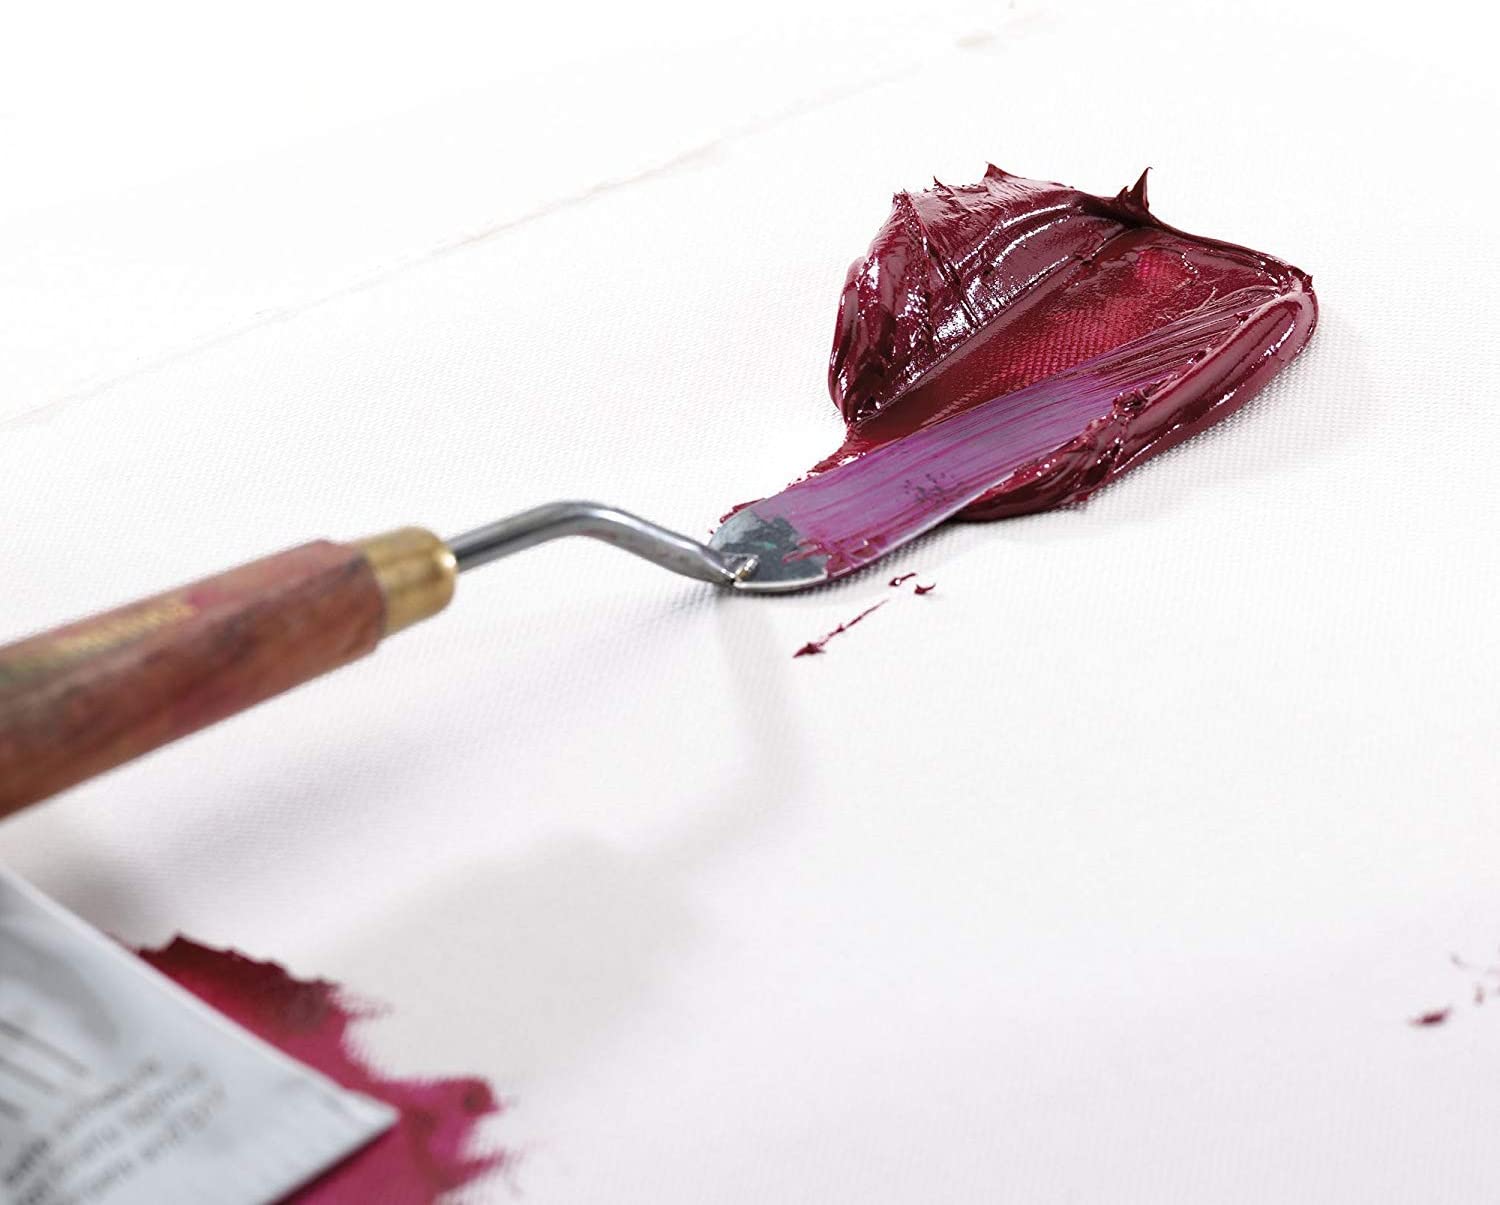 Winsor & Newton Artisan Water Mixable Oil Color Paint in use